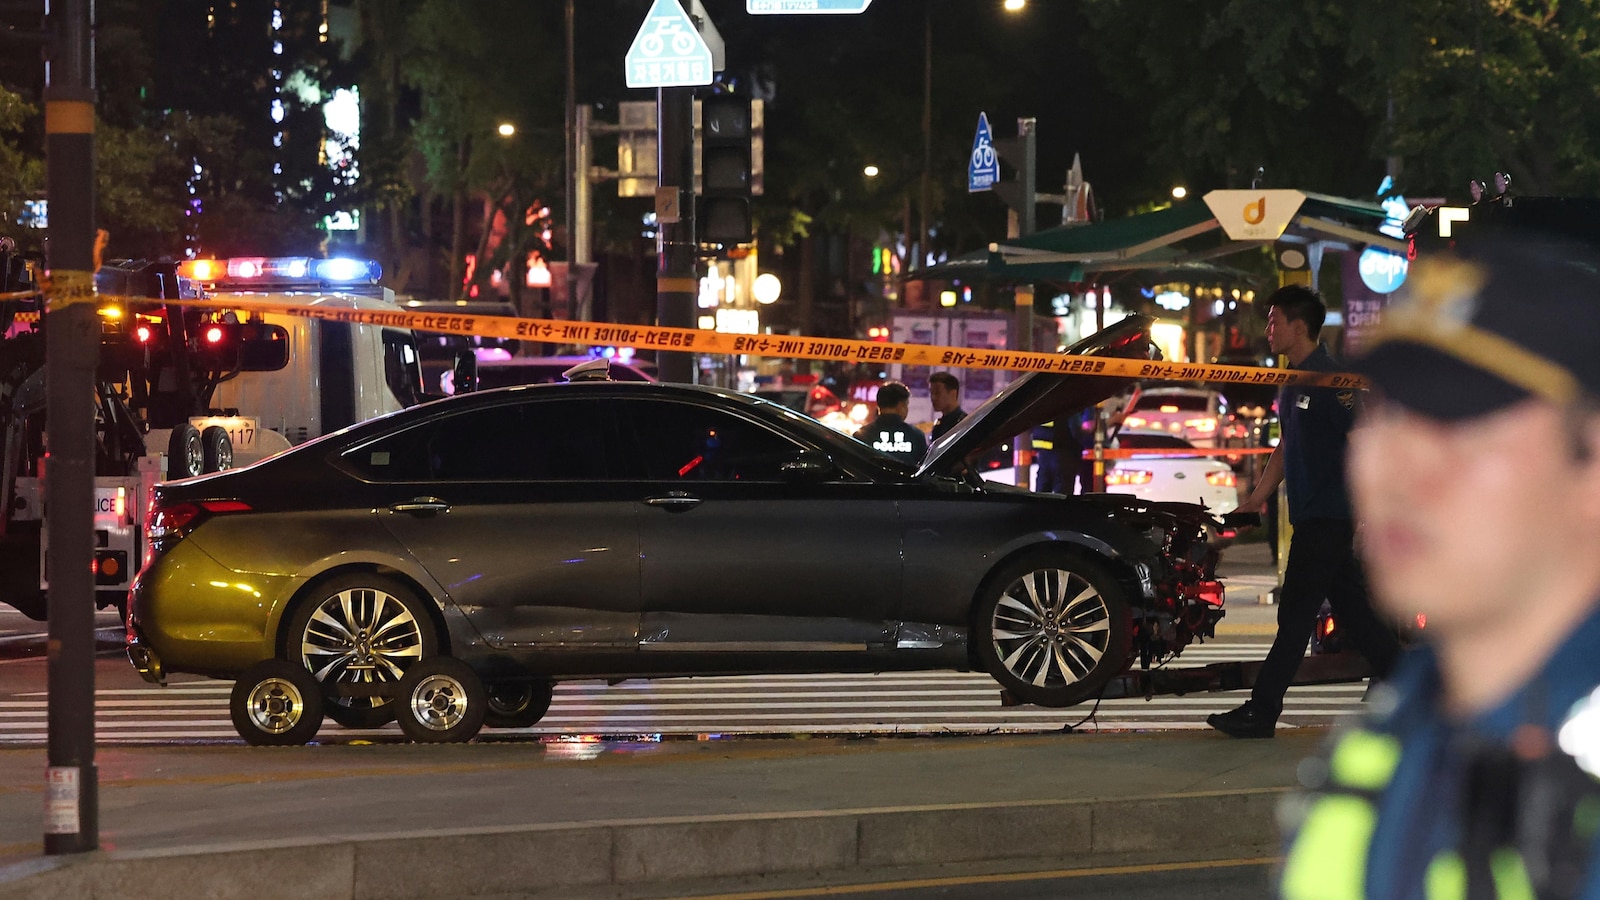 Tragic incident in central Seoul results in 9 fatalities and 4 injuries as car collides with pedestrians